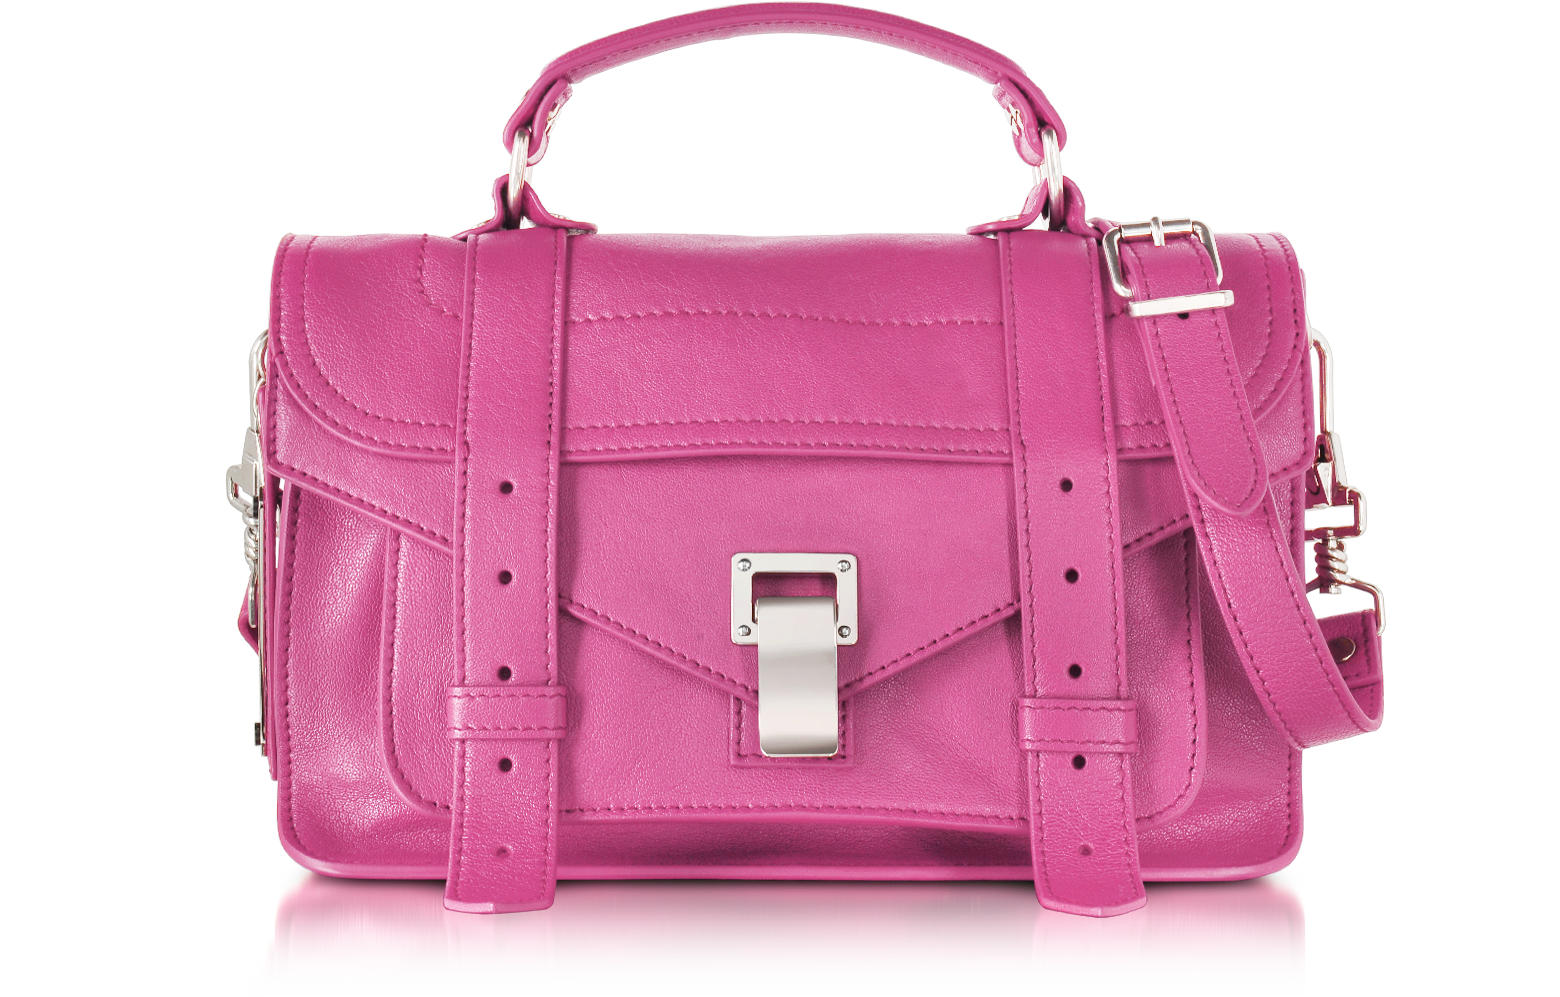 Proenza Schouler Lilac Lux Leather Ps1 Mini Crossbody at FORZIERI